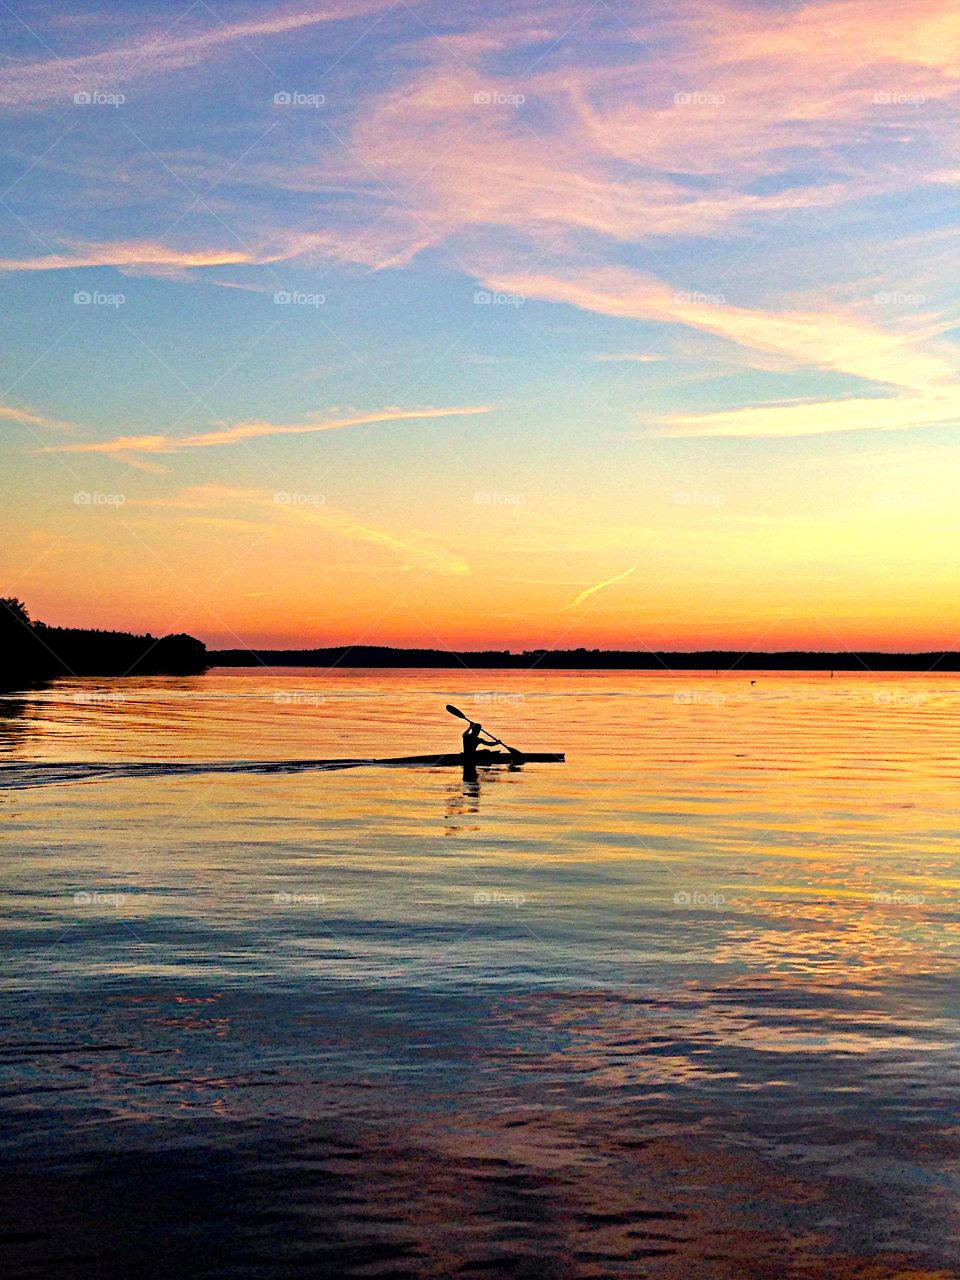 Person on canoe at sunrise